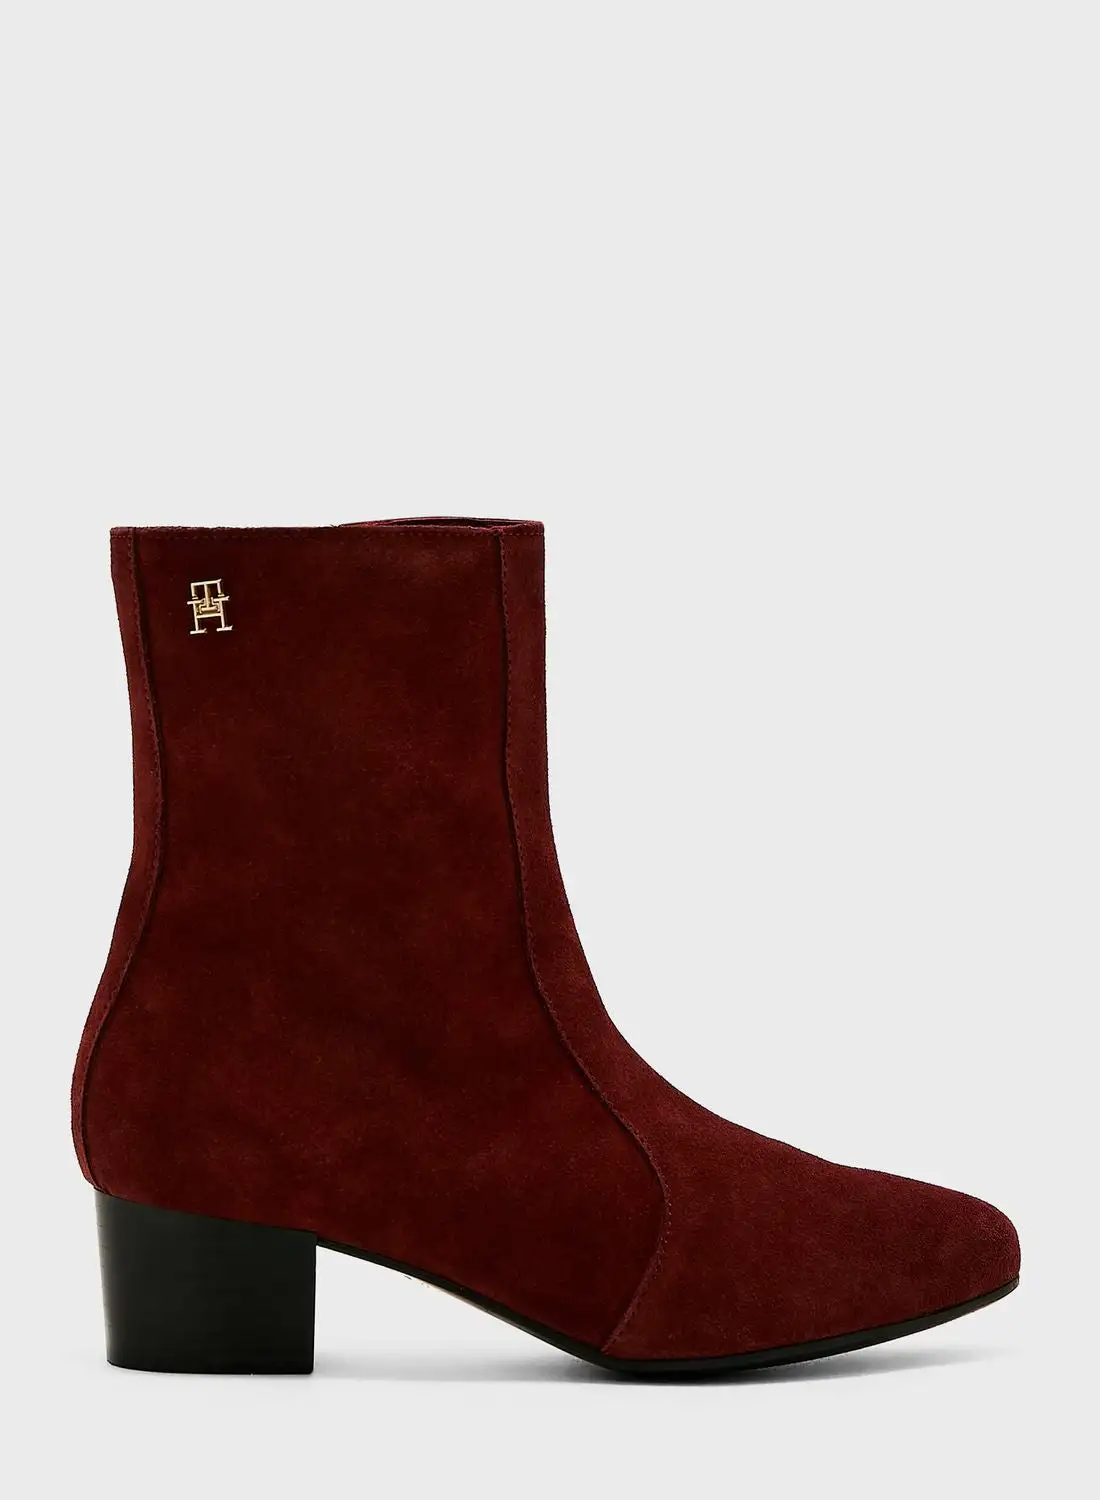 TOMMY HILFIGER Feminine City Suede Ankle Boots